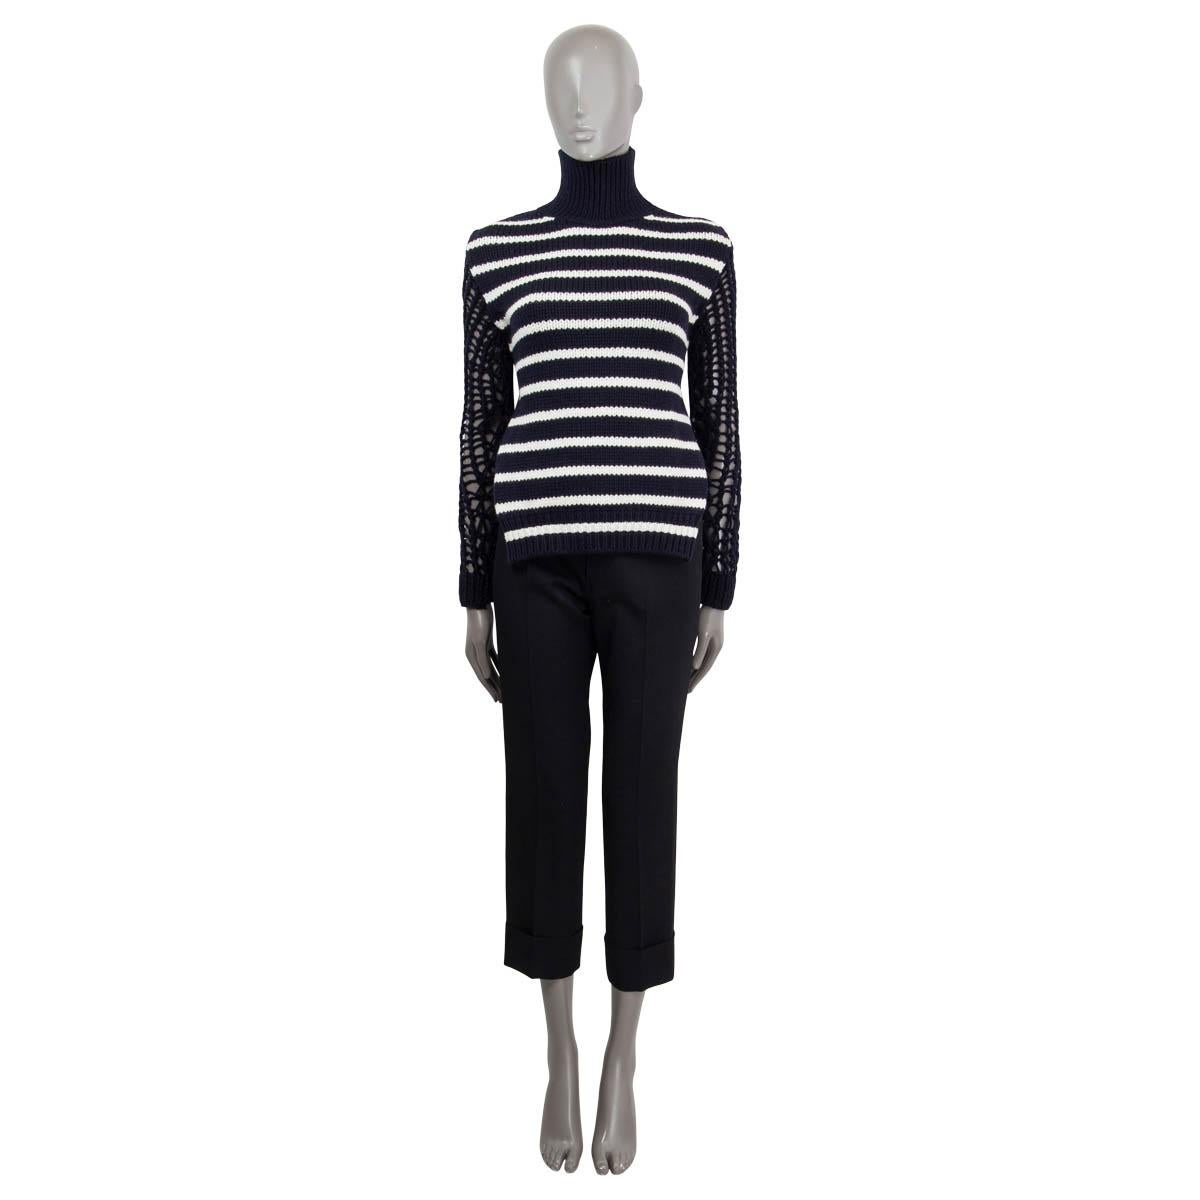 100% authentic Christian Dior open back striped turtleneck knit sweater in navy and off-white wool (70%) and polyamide (30%). Features long chunky knit sleeves and opens with a self-tie cord on the back. Unlined. Has been worn once and is in